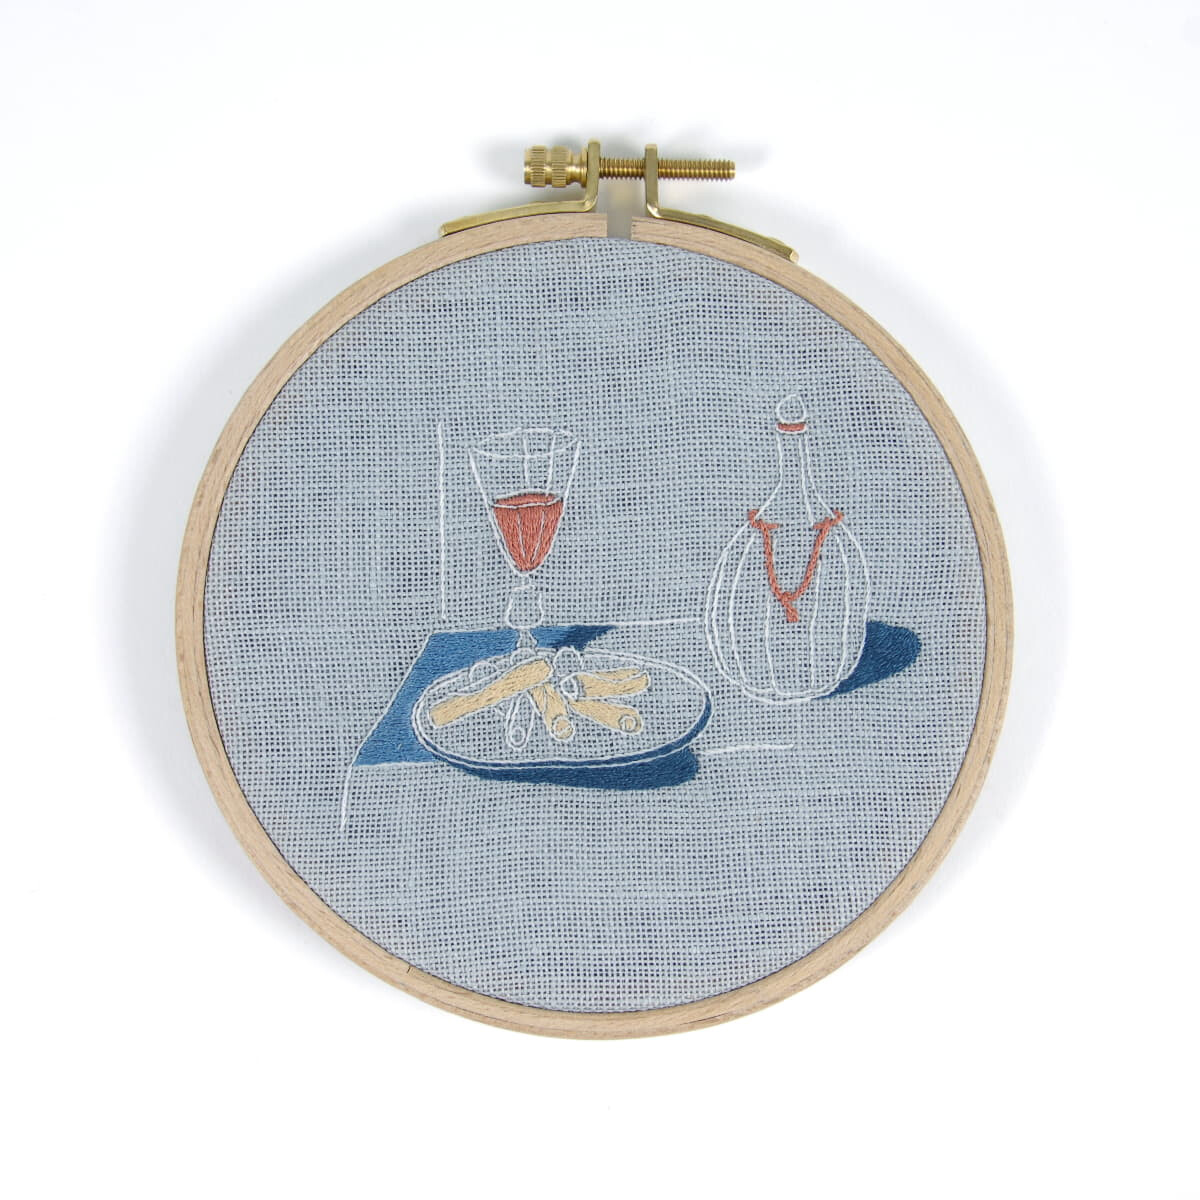 DMC stamped satin stitch kit with wooden hoop...